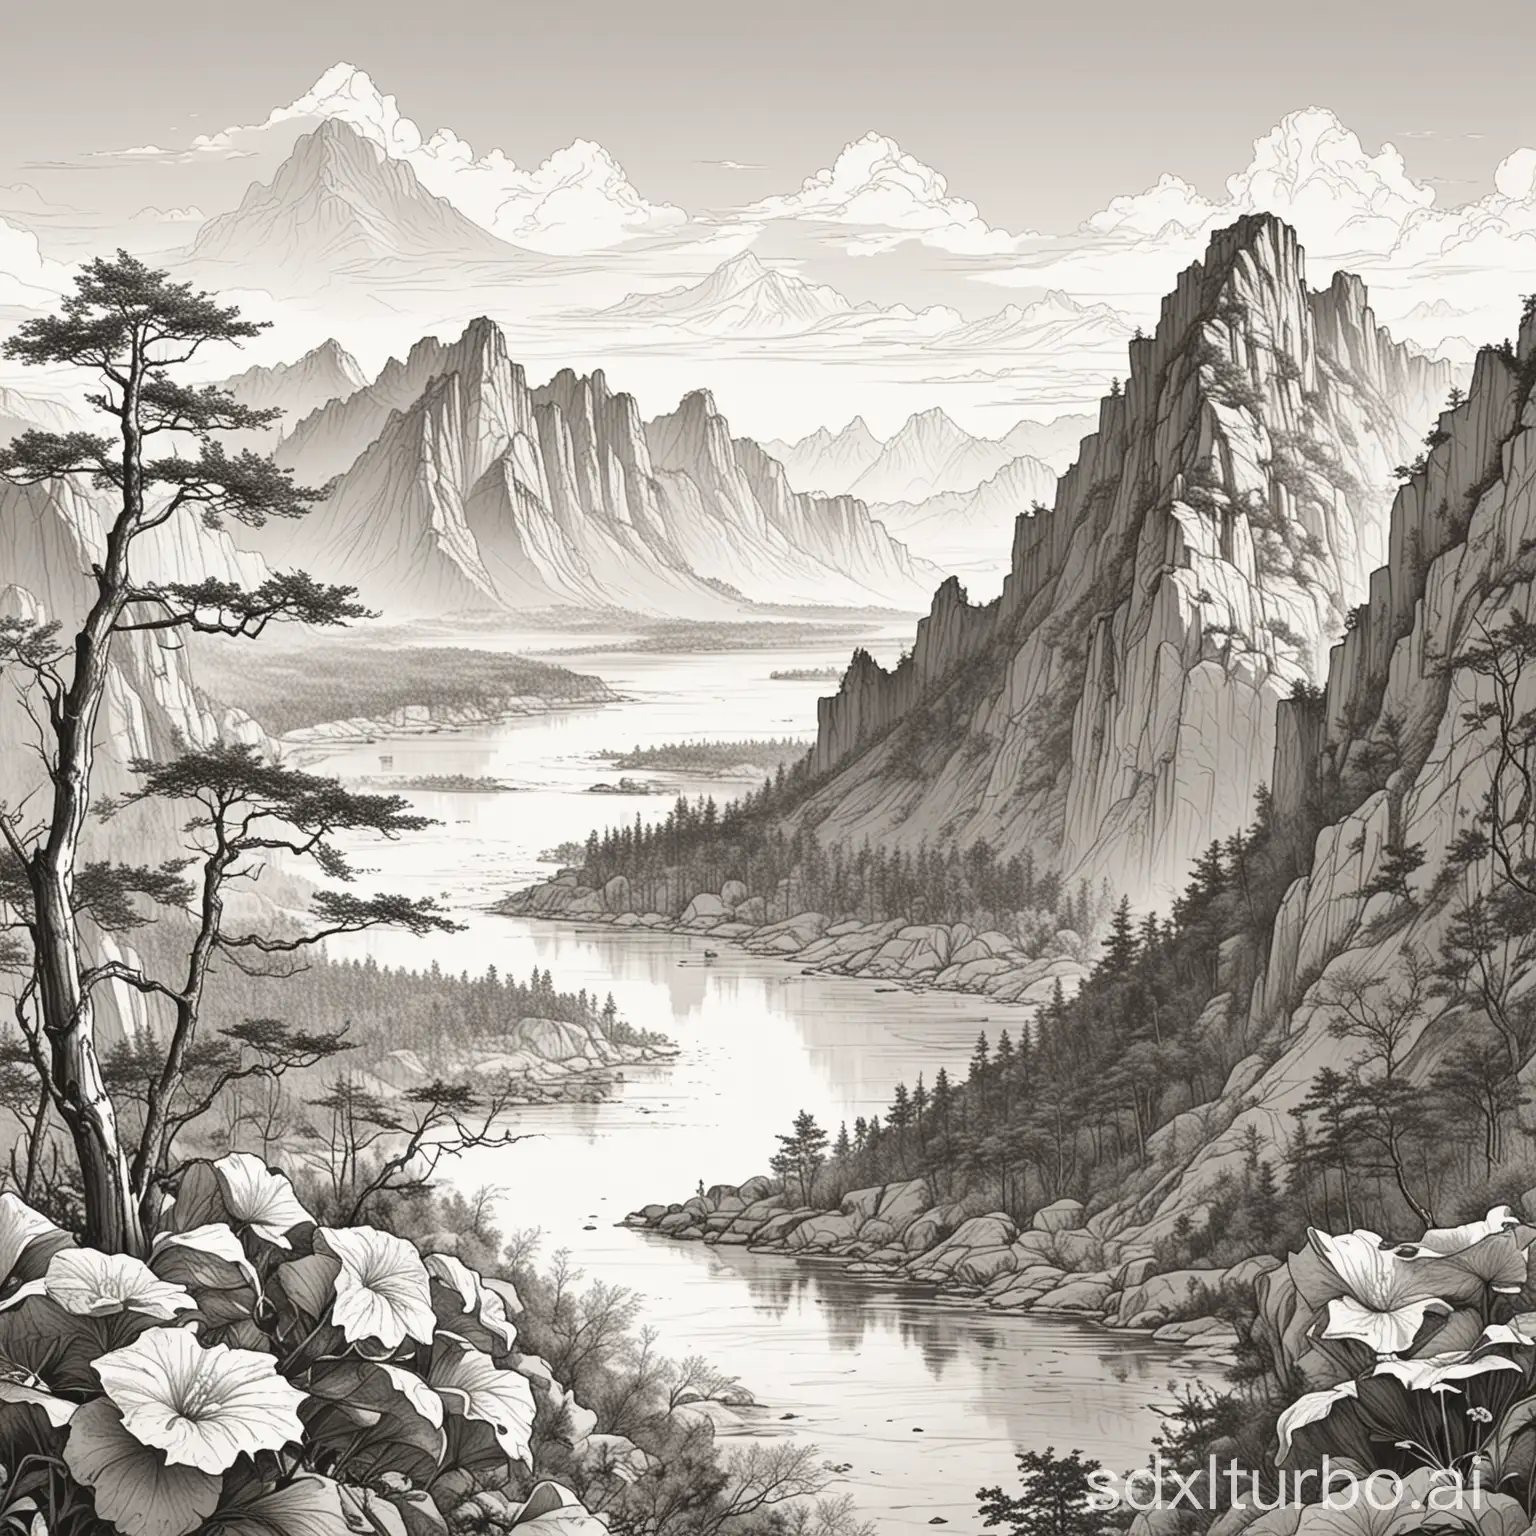 China Changbai Mountain, illustration line art, borderless, artistic, the main object is Changbai Mountain, there are mountains, rivers and trees